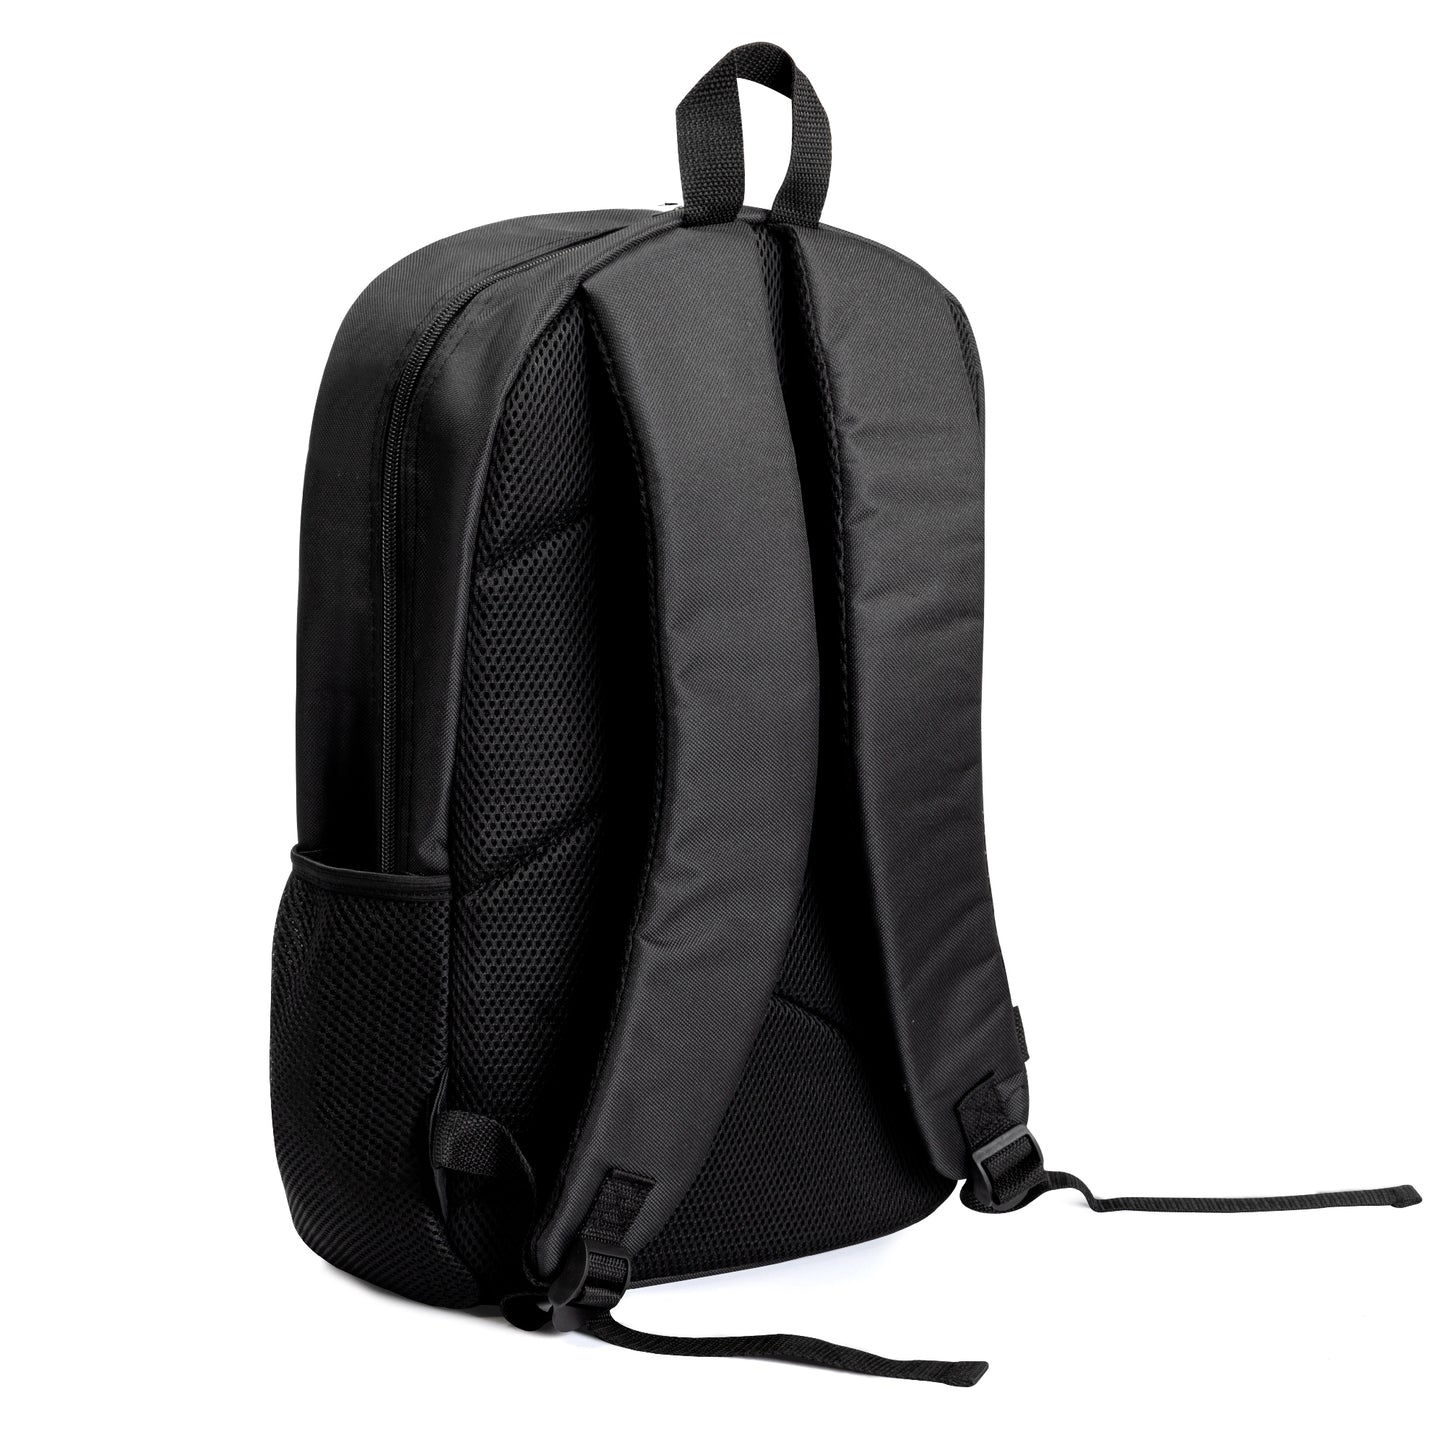 Rise from the Ashes Kids Black Chain Backpack